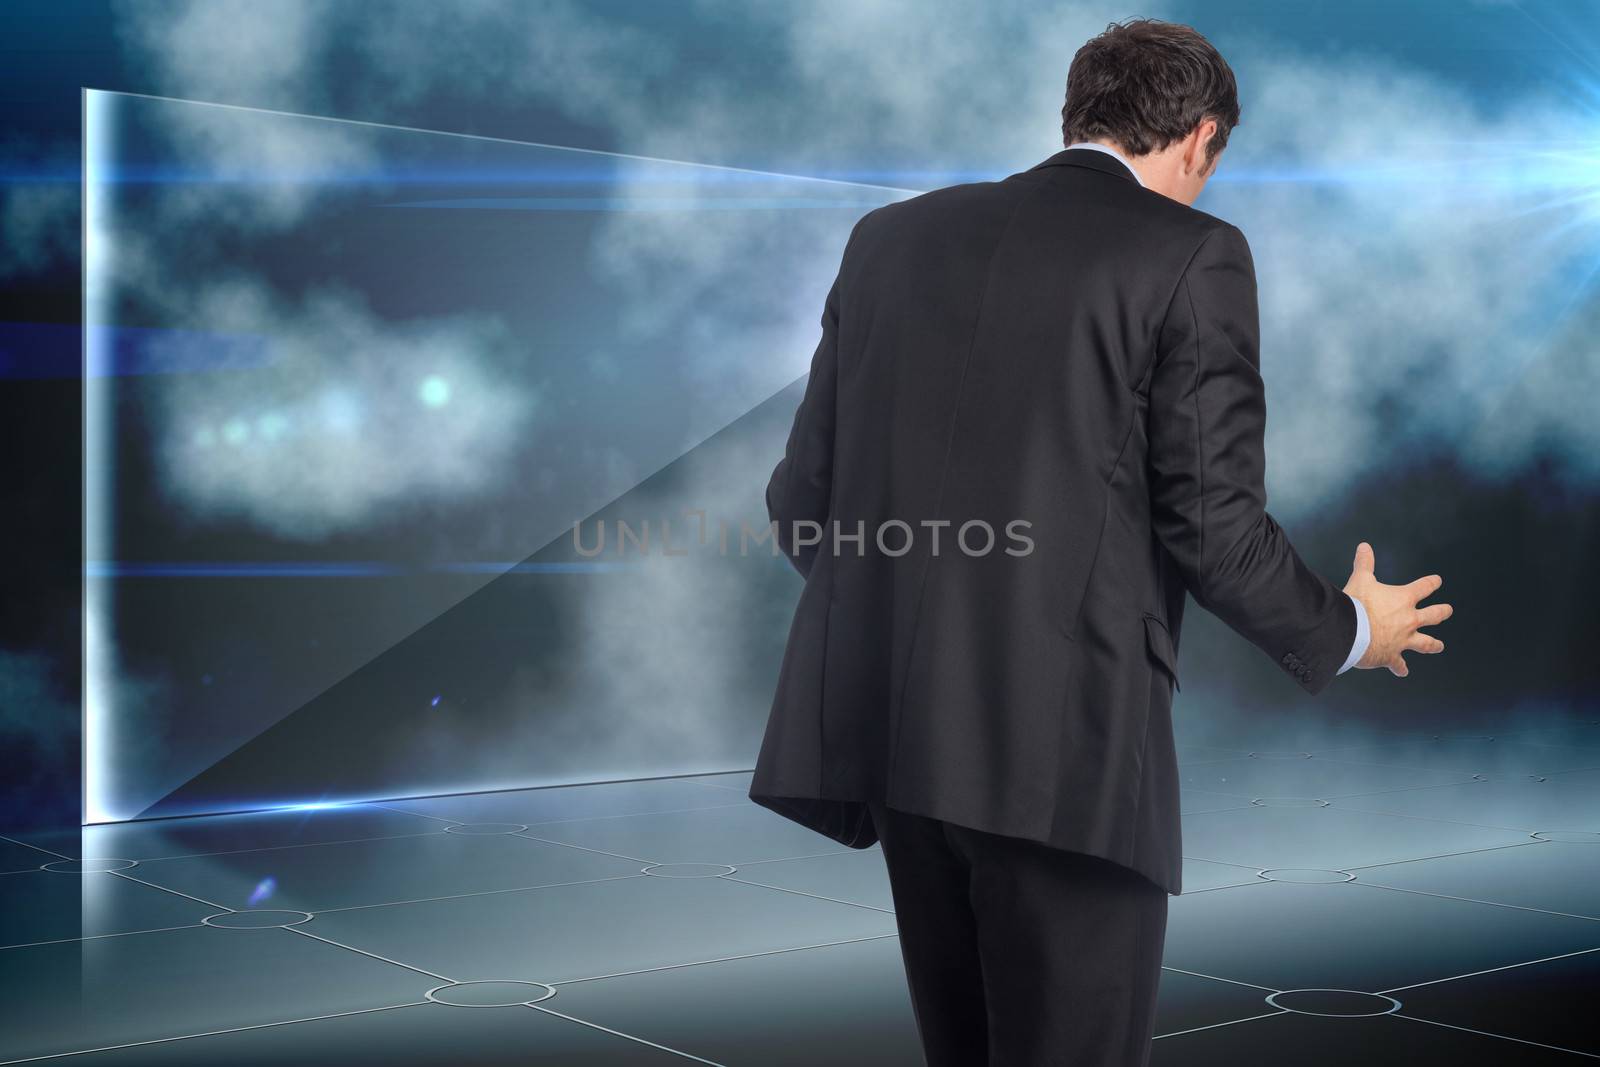 Stressed businessman gesturing against futuristic technology interface